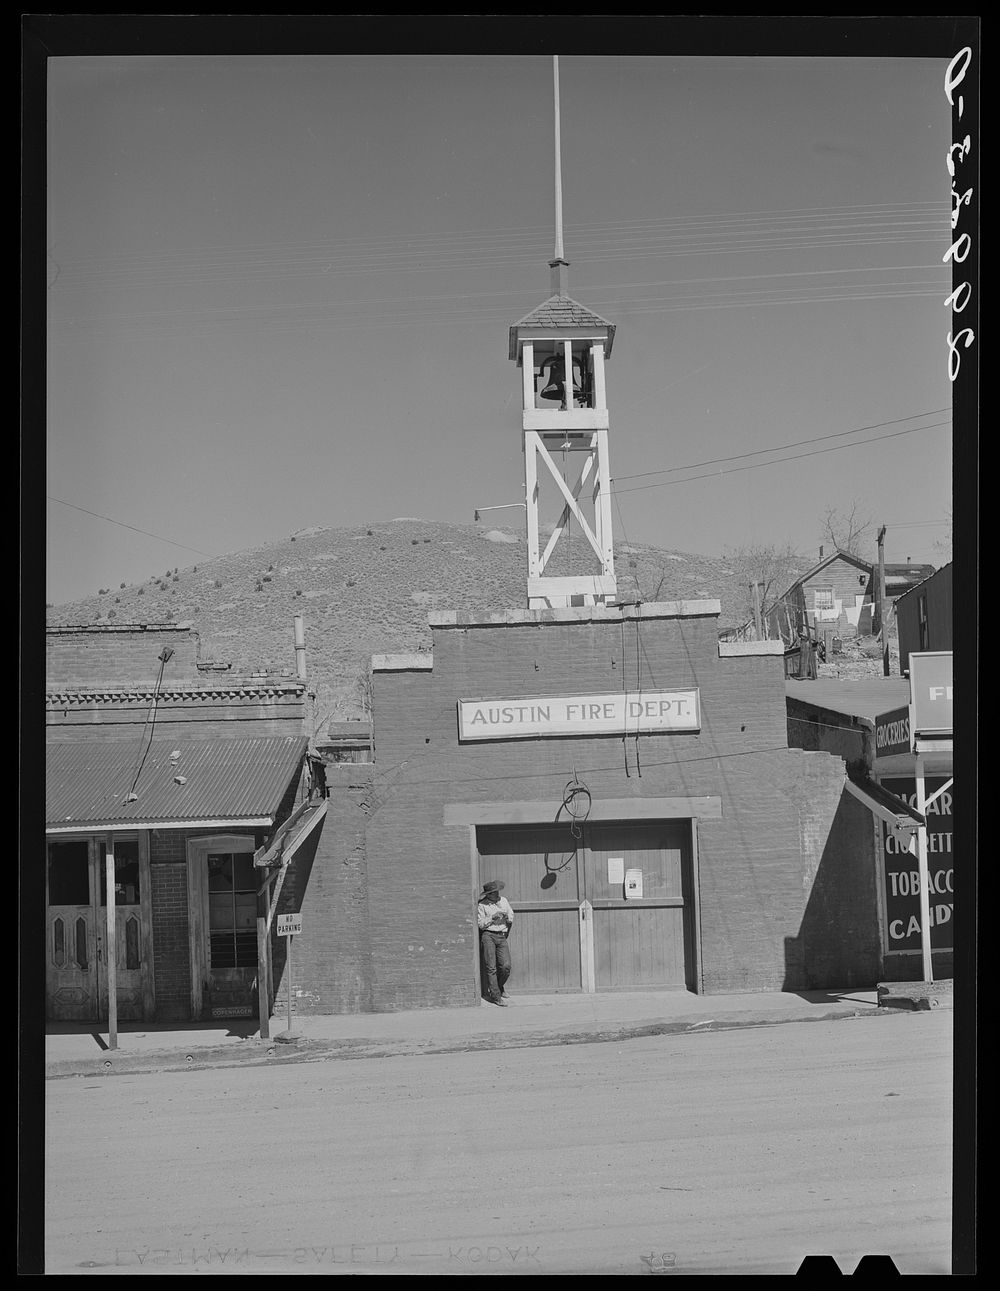 [Untitled photo, possibly related to: Fire department. Austin, Nevada]. Sourced from the Library of Congress.